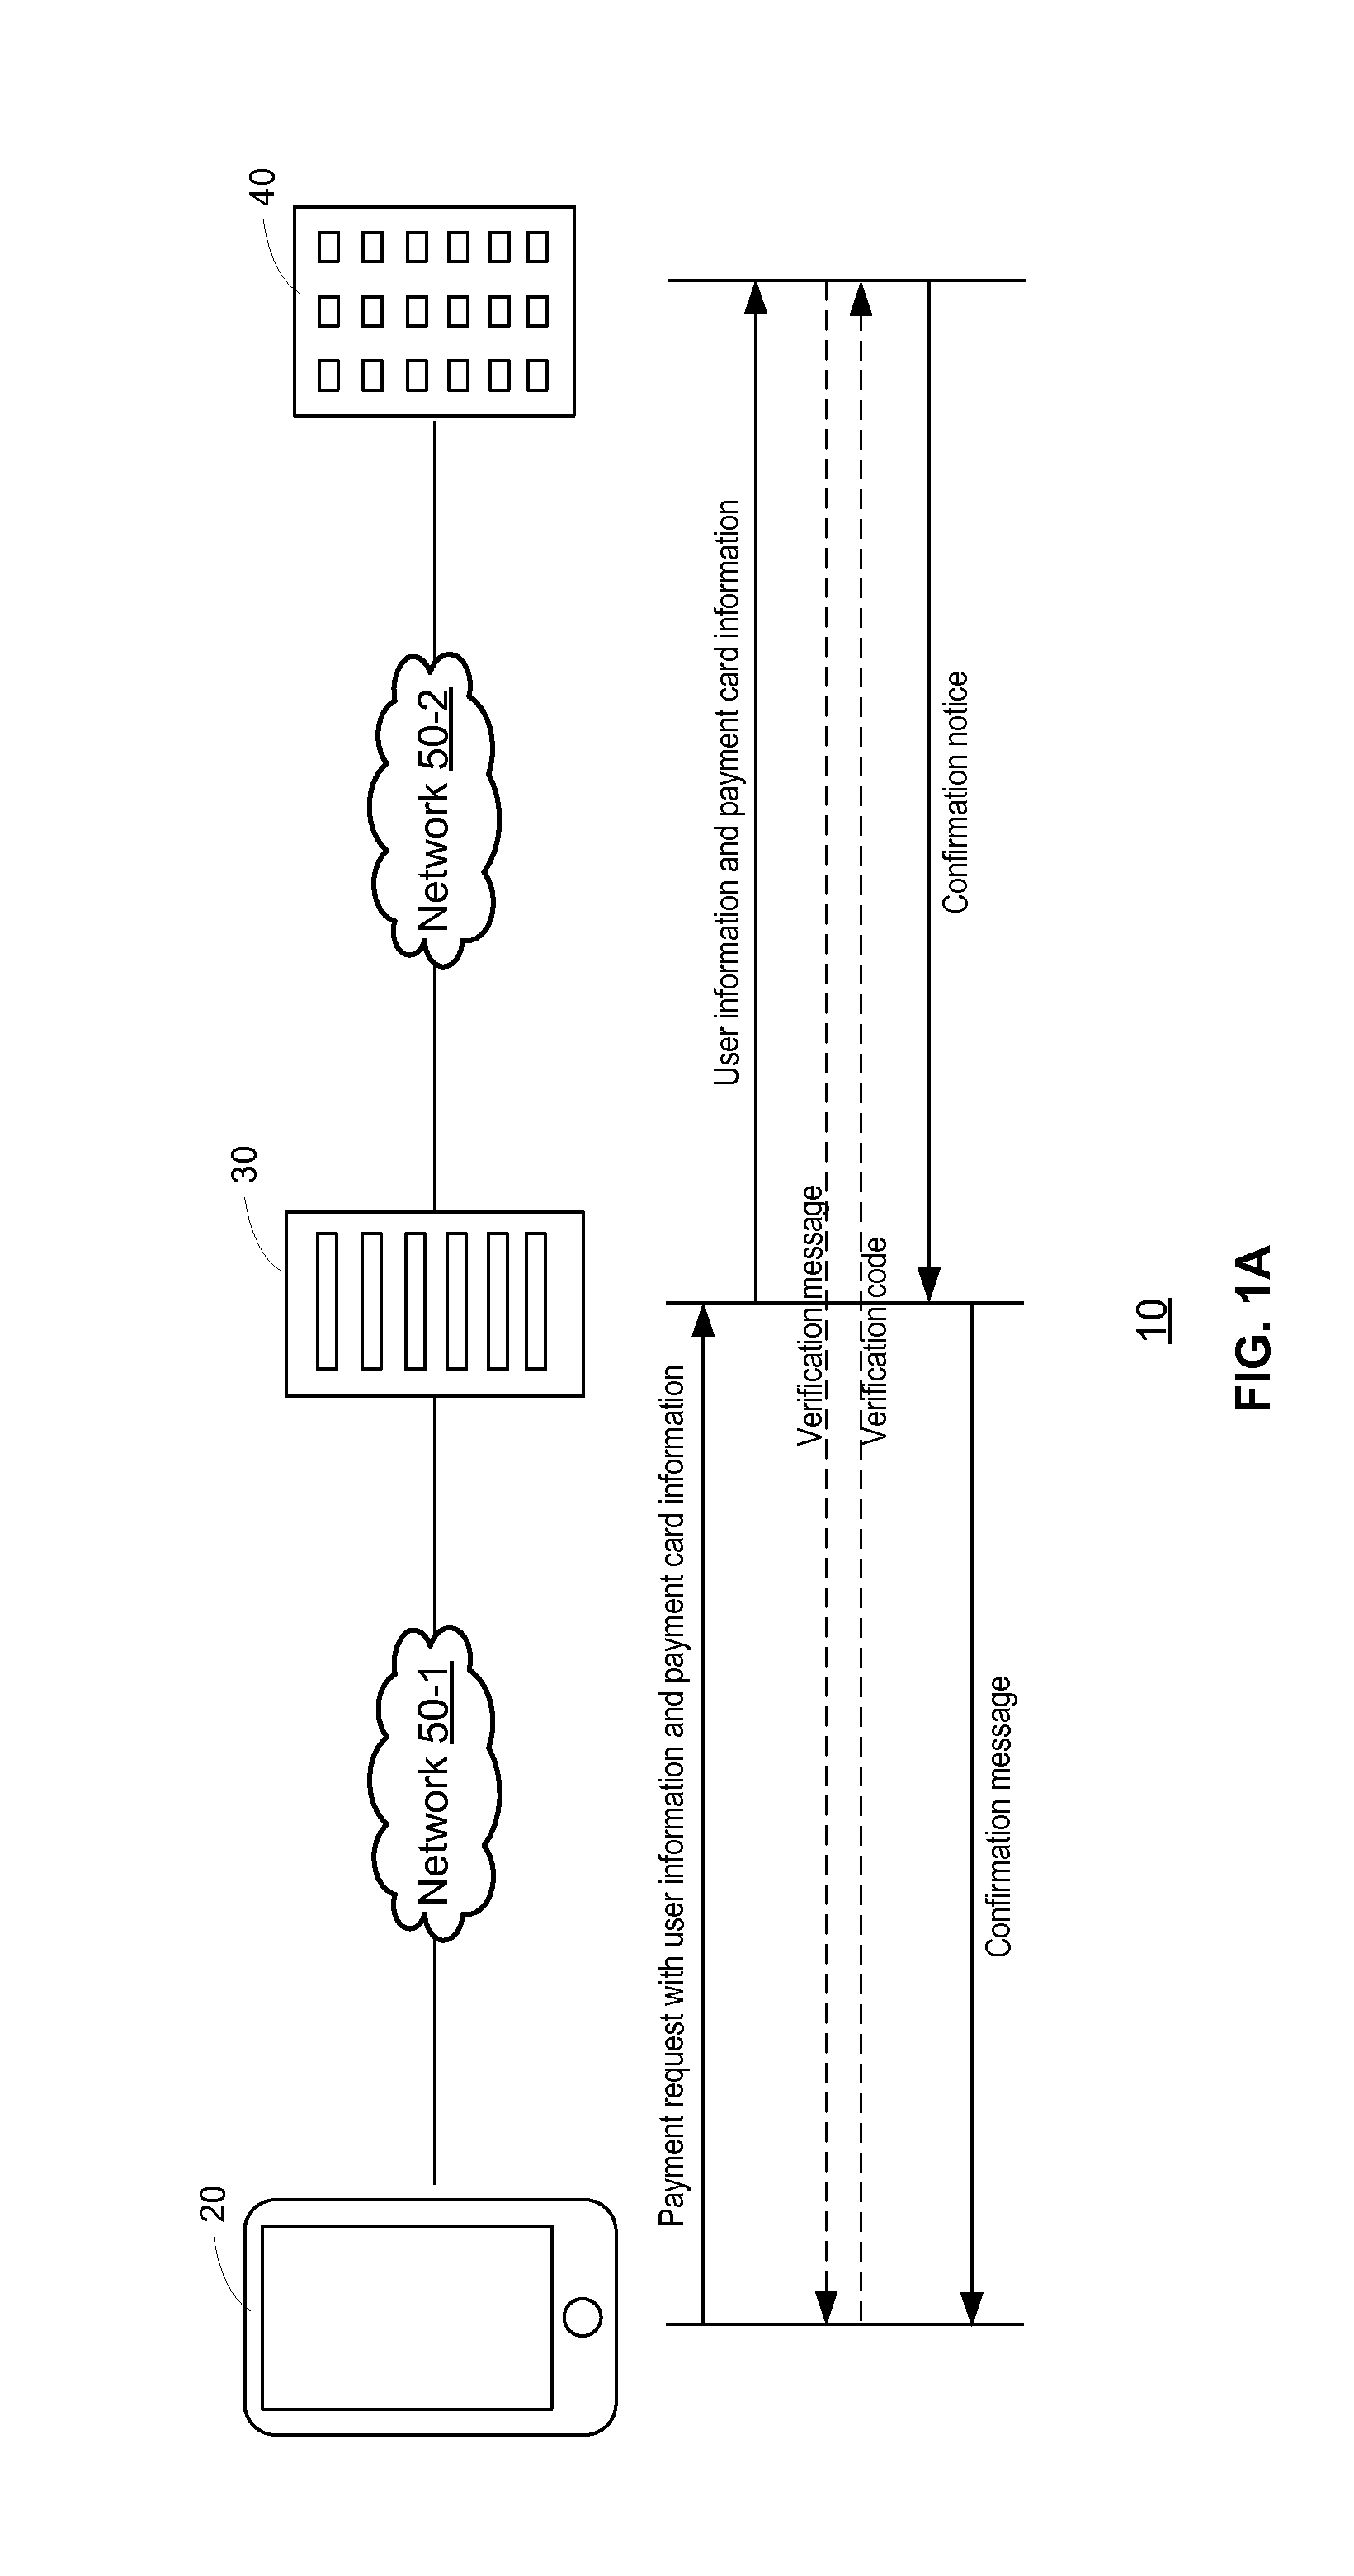 System and method for authenticating, associating and storing secure information